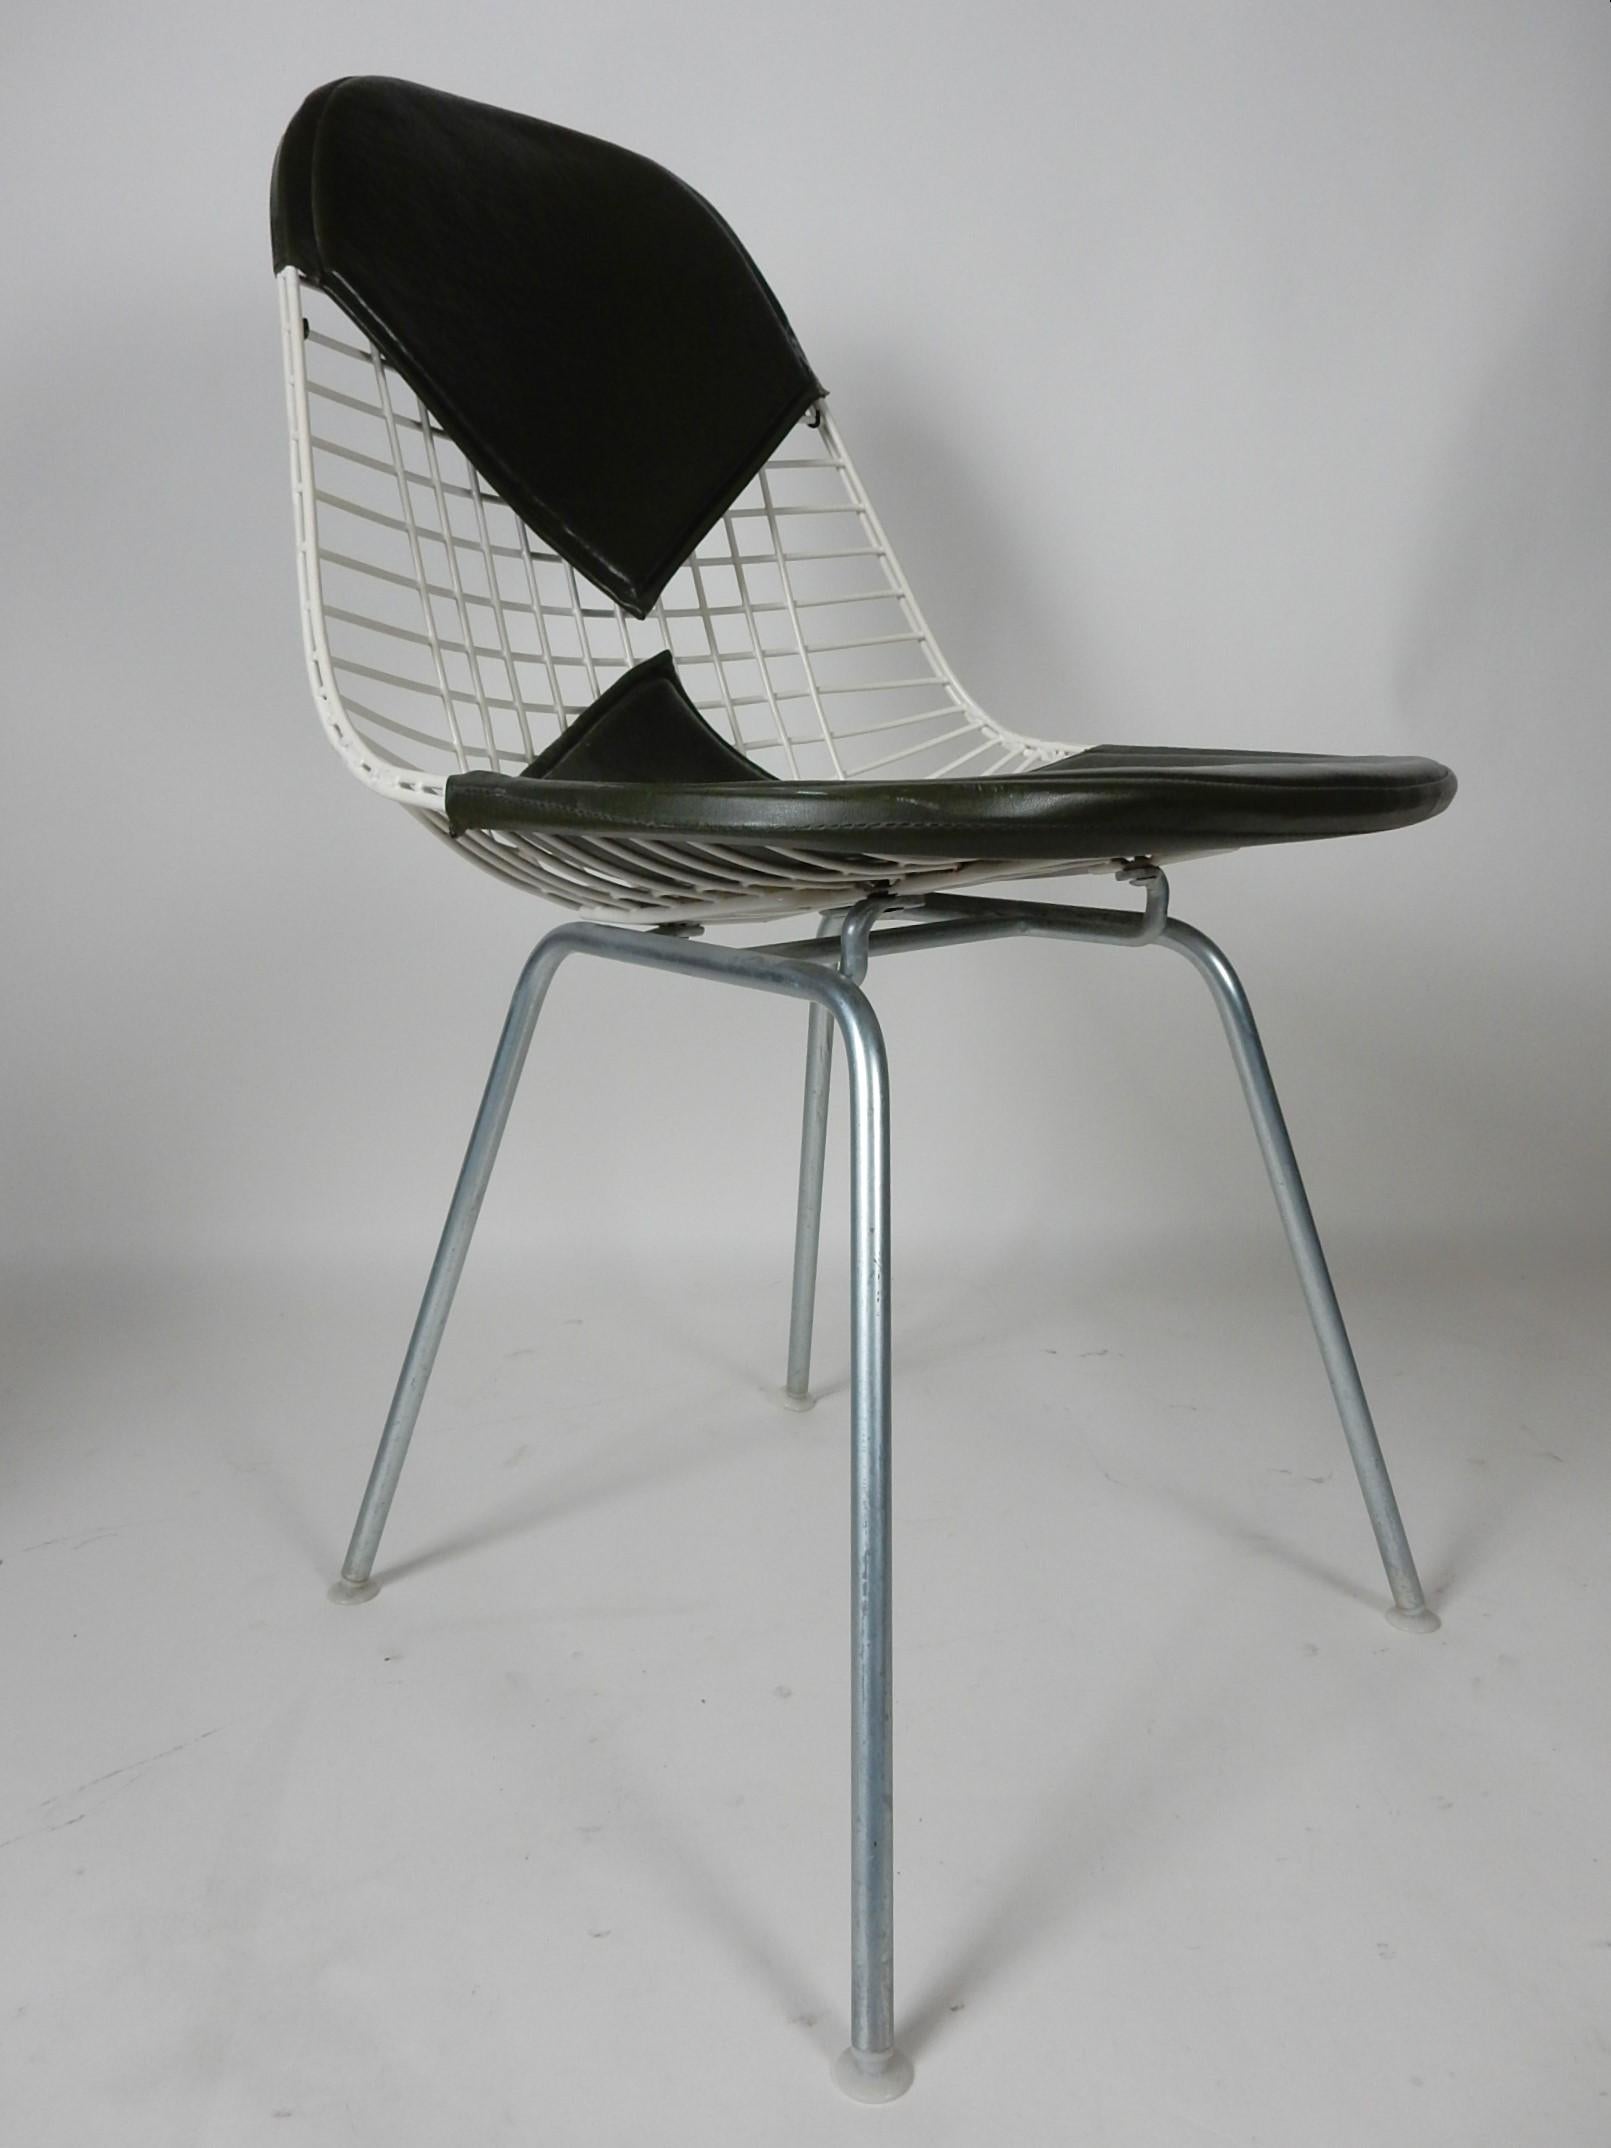 Aluminum Original 1960's Herman Miller Charles & Ray Eames Bikini Wire Chairs set of 4 For Sale